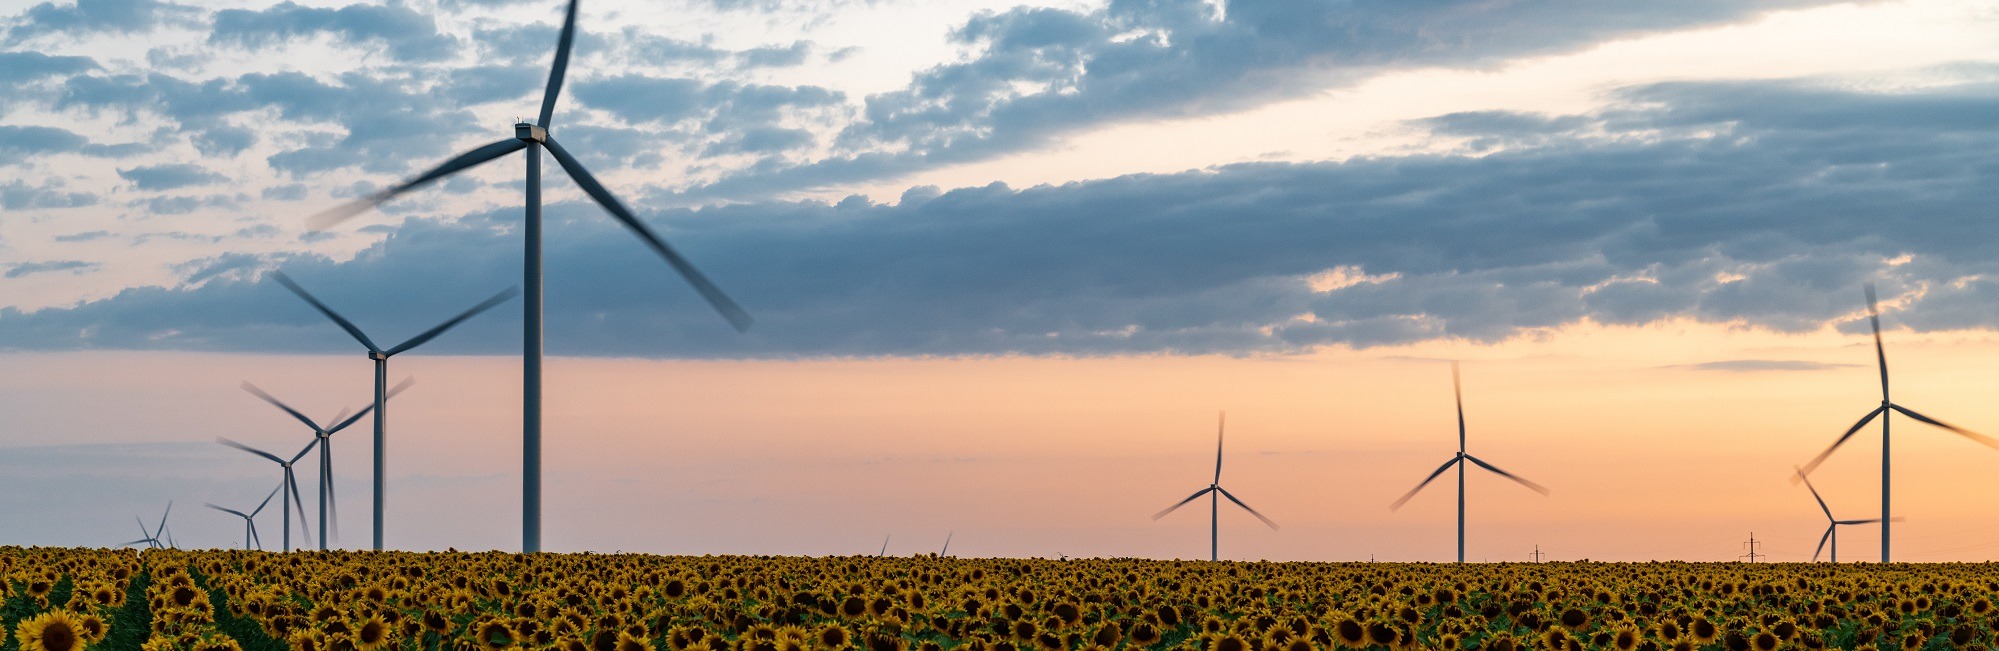 Wind,Power,Farm,In,Sunflowers,Field,At,Sunset